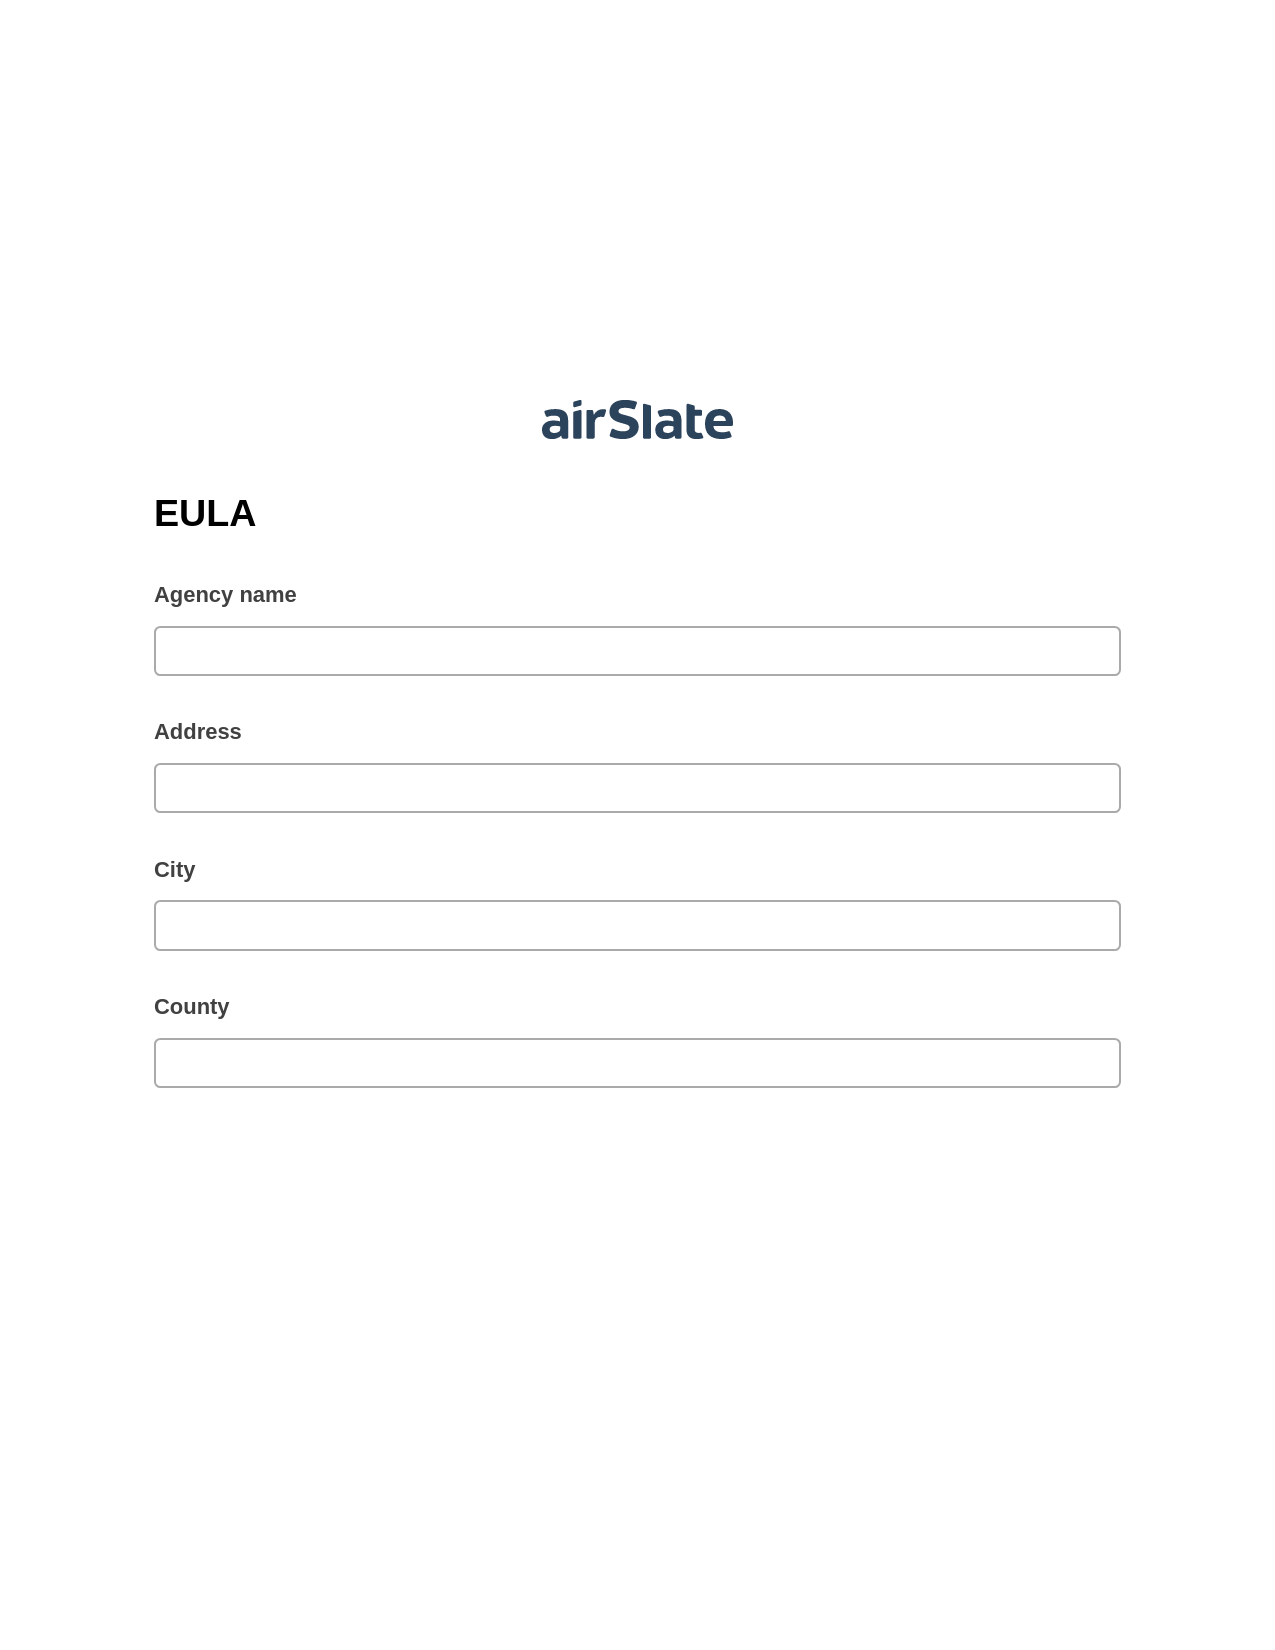 EULA Pre-fill from Salesforce Records with SOQL Bot, Reminder Bot, Export to Smartsheet